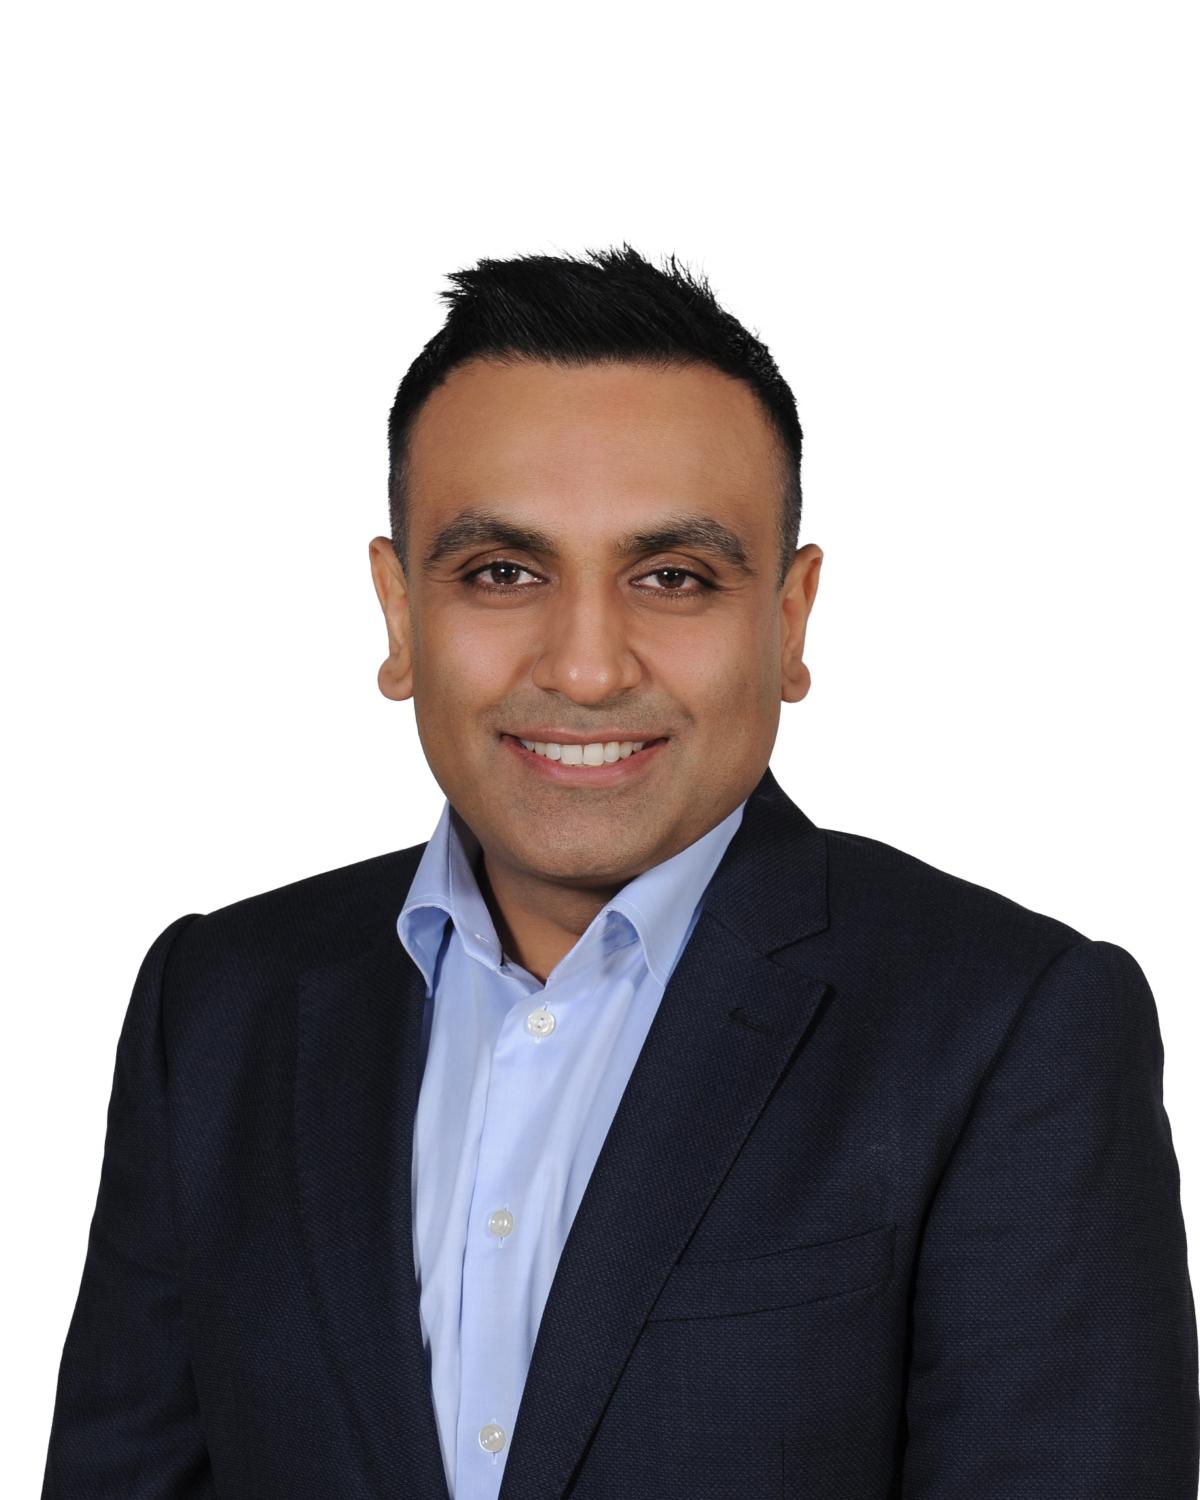 Dr Pramit Patel, Lead Primary Care Network Clinical Director